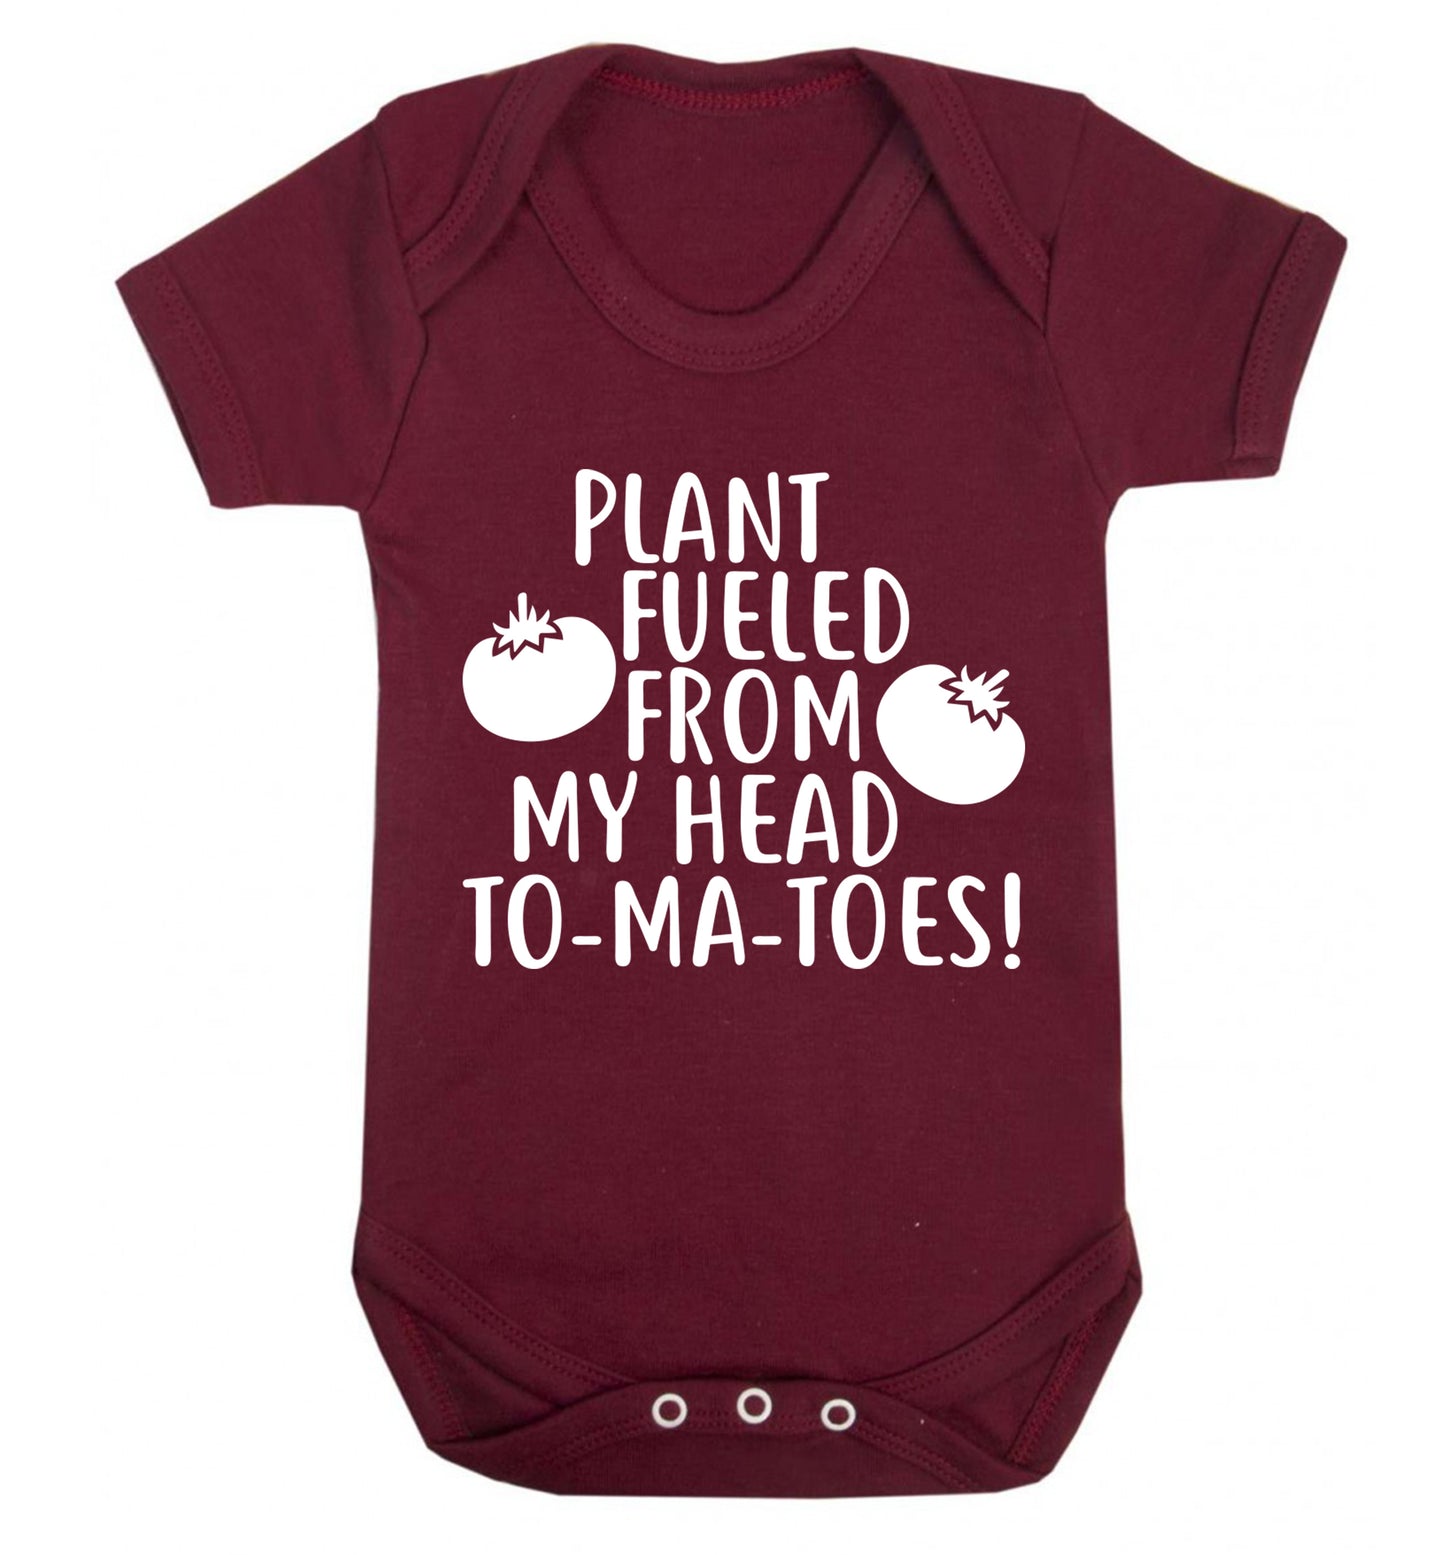 Plant fueled from my head to-ma-toes Baby Vest maroon 18-24 months